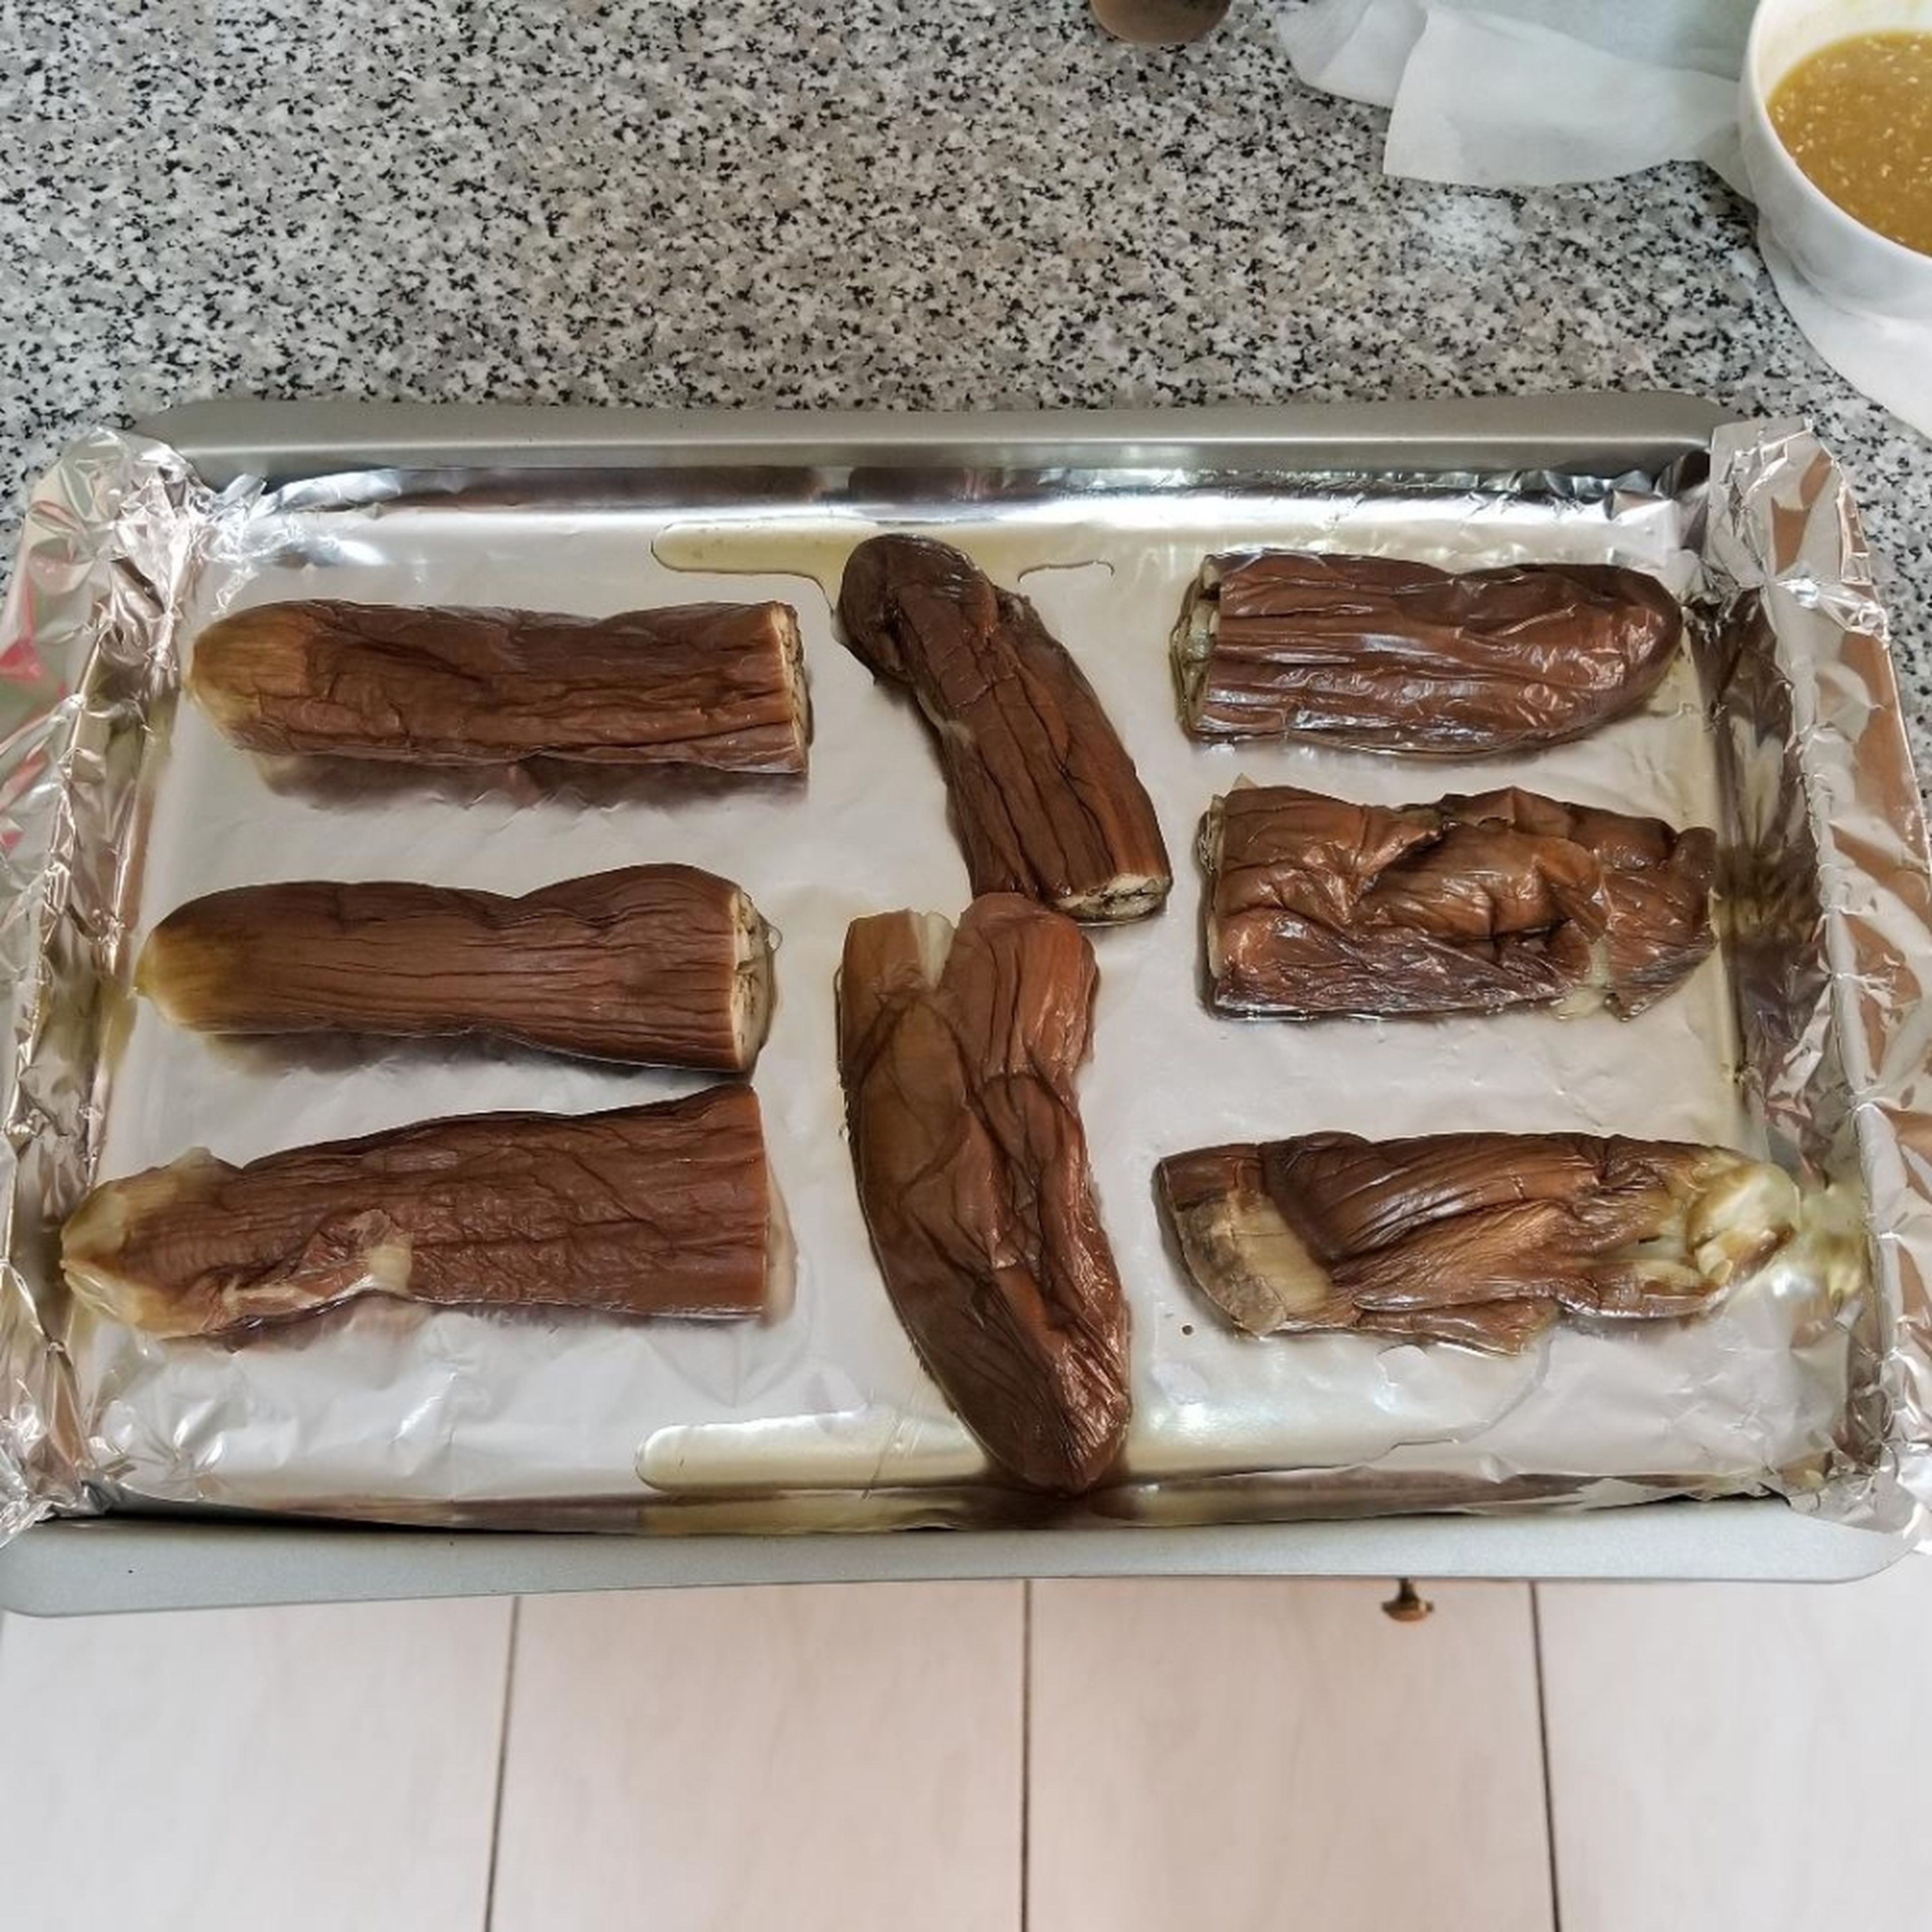 Carefully move eggplants onto an aluminum foil lined baking tray. Note the eggplants will be super soft, so use a pair of tongs to move (chopsticks won't work!)